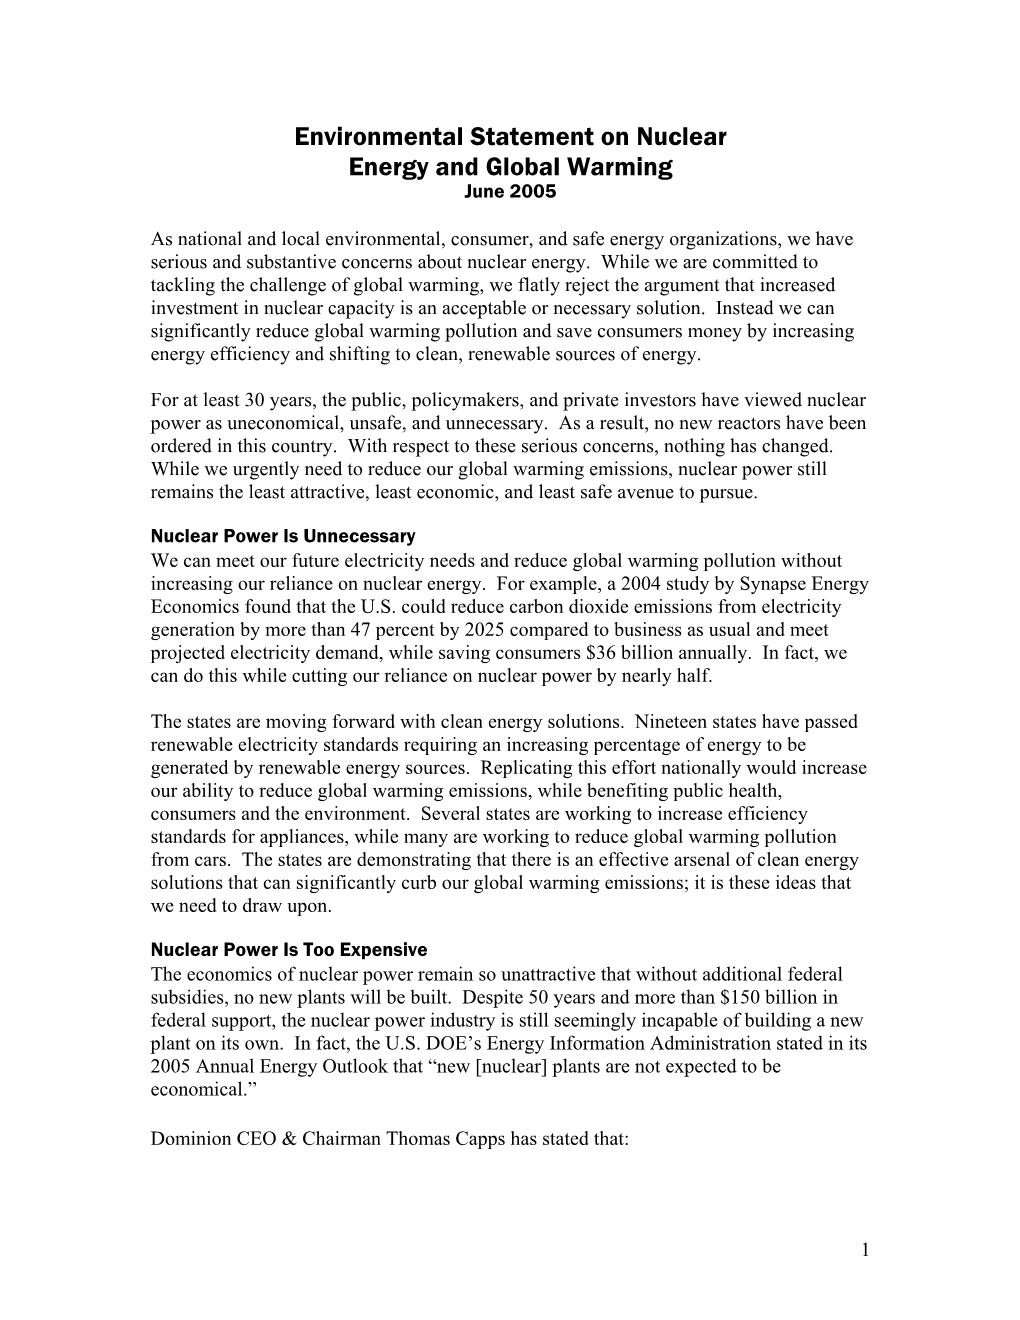 Environmental Statement on Nuclear Energy and Global Warming June 2005